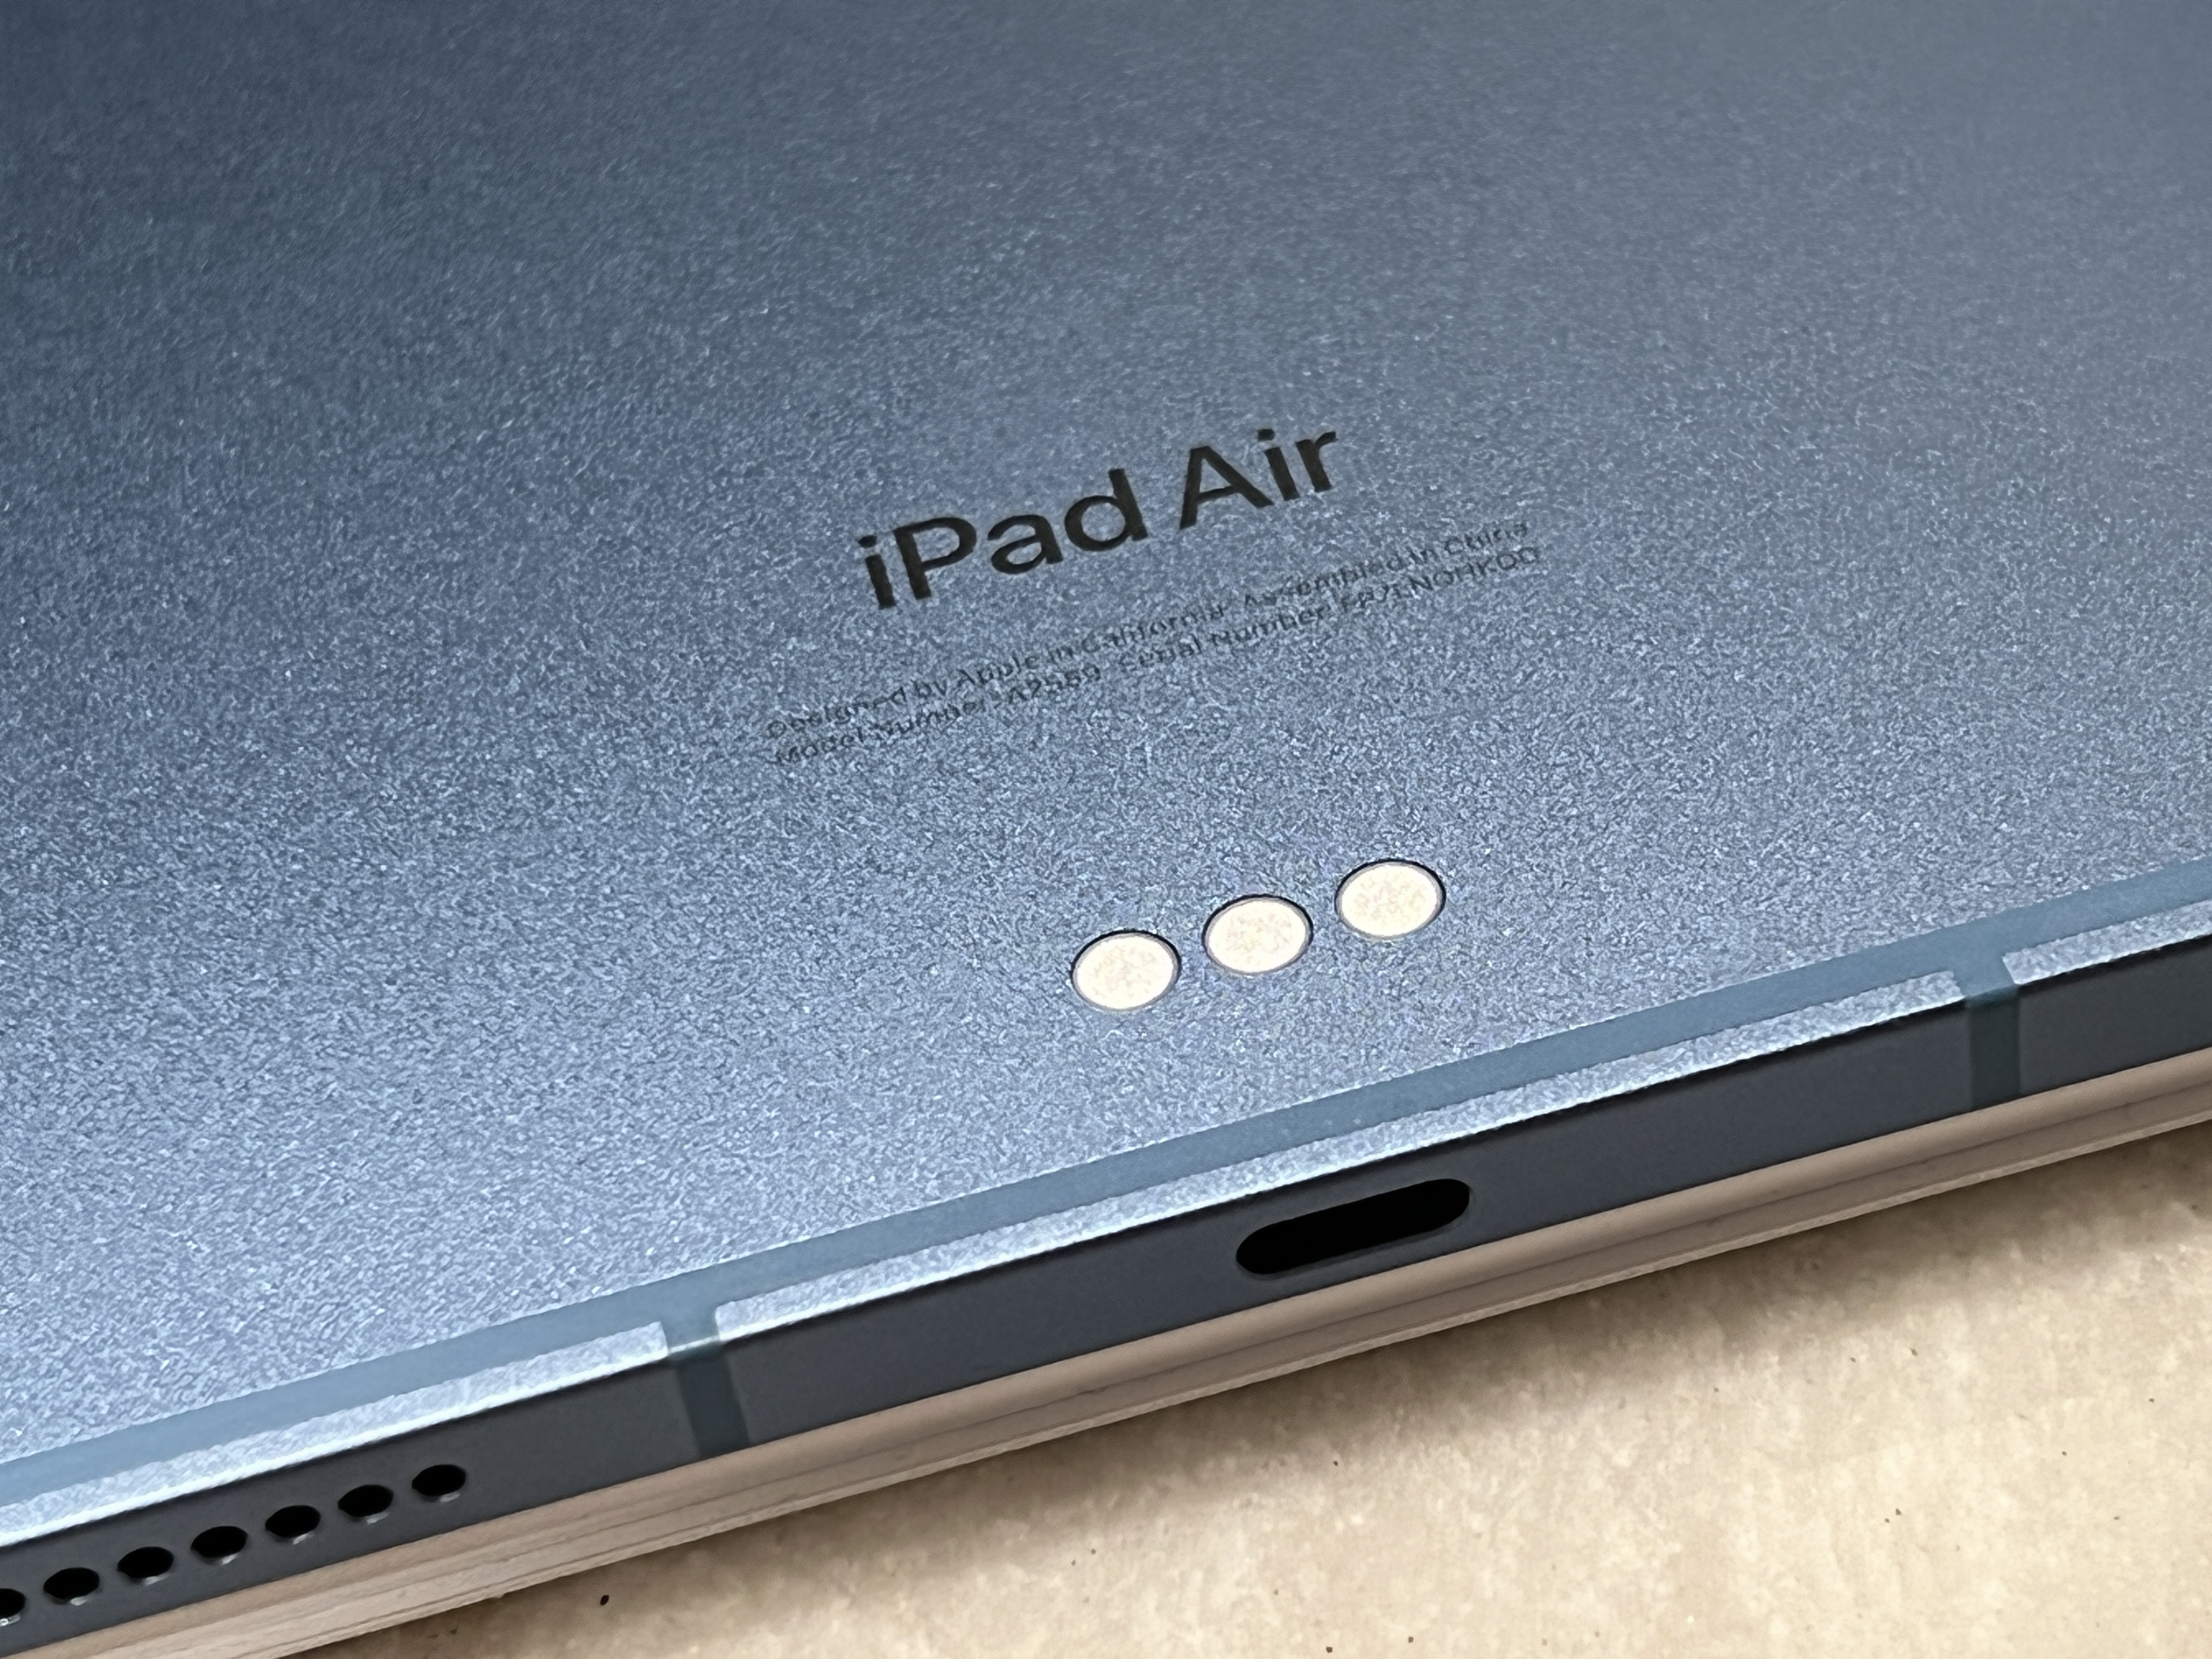 Apple's 2022 iPad Air elbows M1 into the lineup